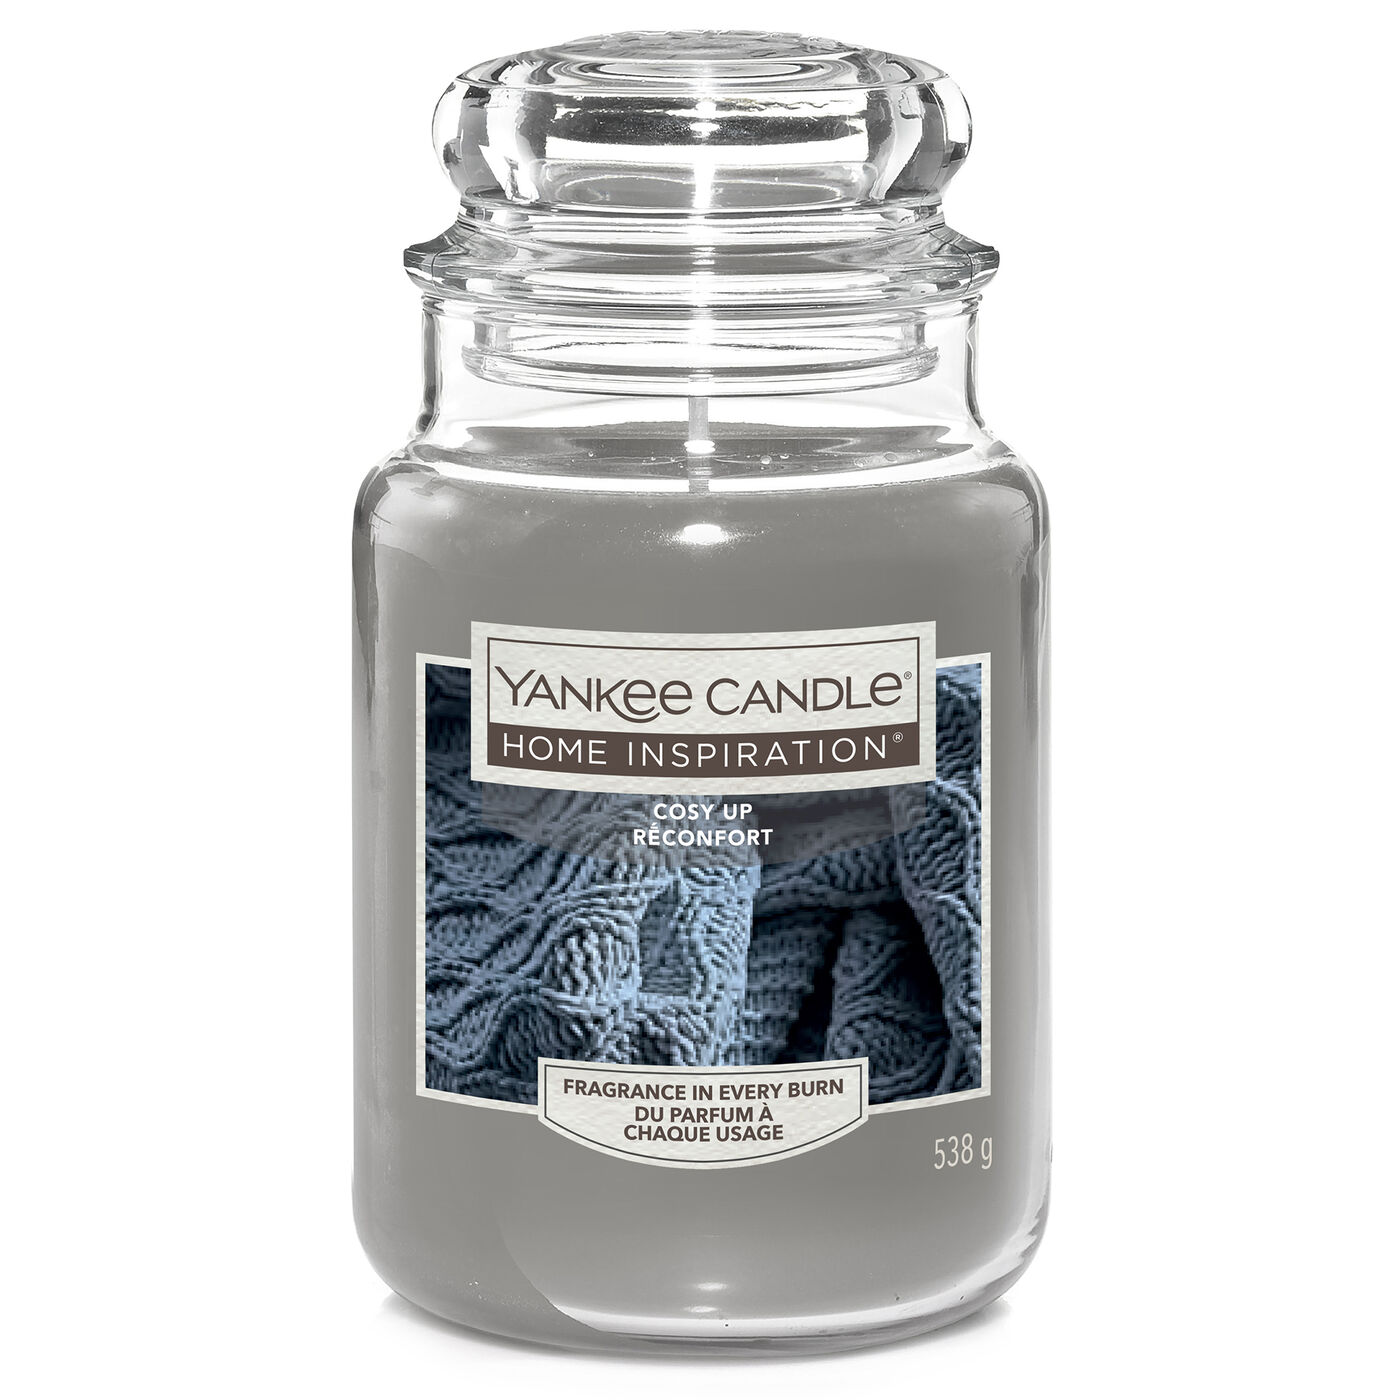 Buy Large Home Inspiration Yankee Candle - Cosy Up for GBP 14.00 | Card ...